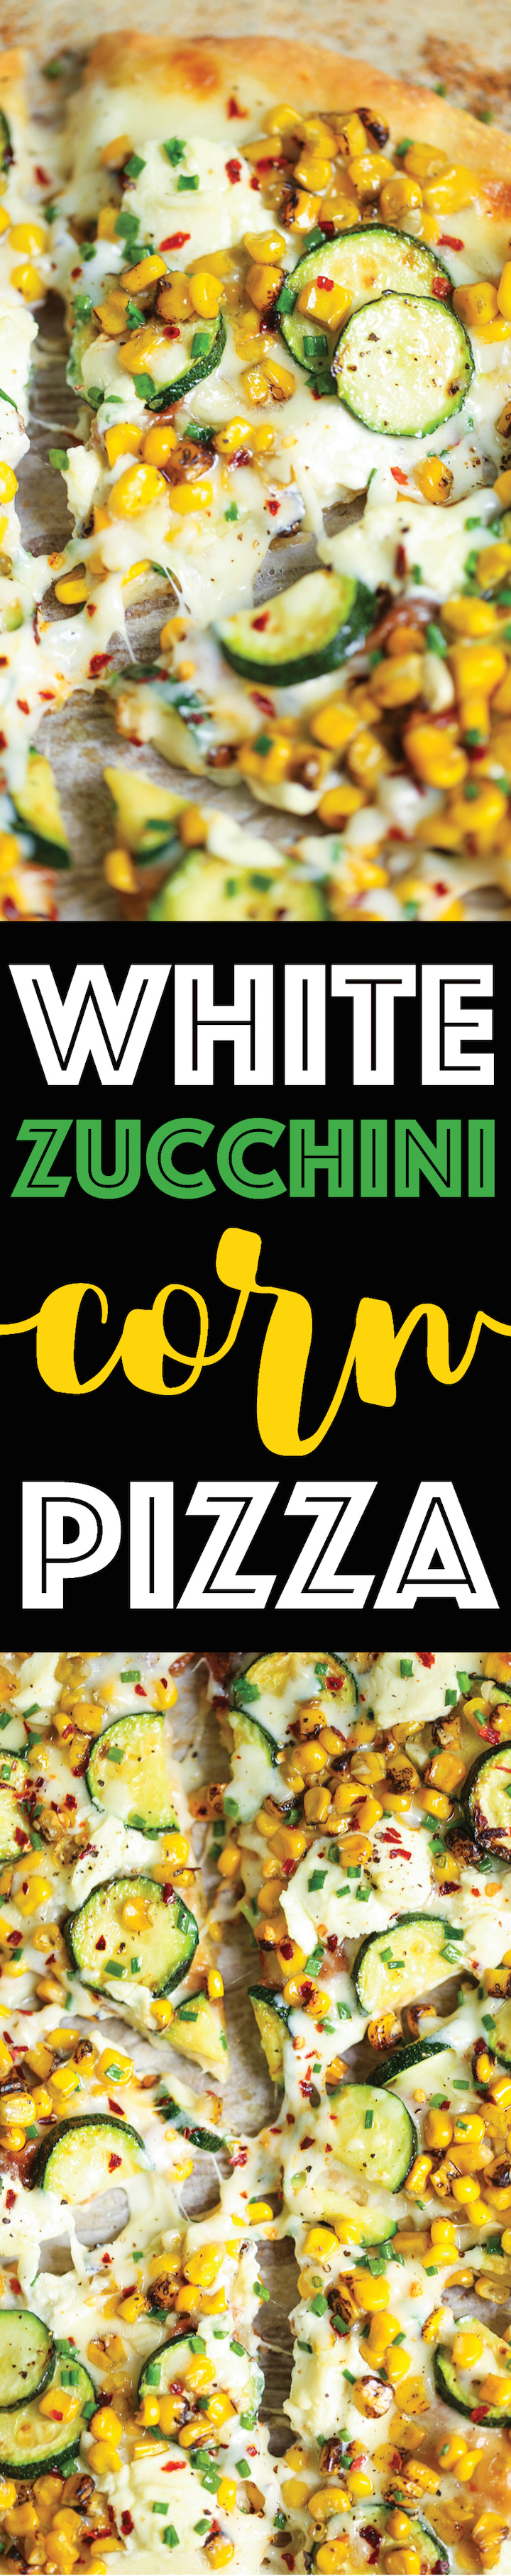 White Zucchini Corn Pizza - Use up all your lingering zucchini in the most amazing white pizza! With corn kernels, dollops of ricotta and mozzarella cheese!